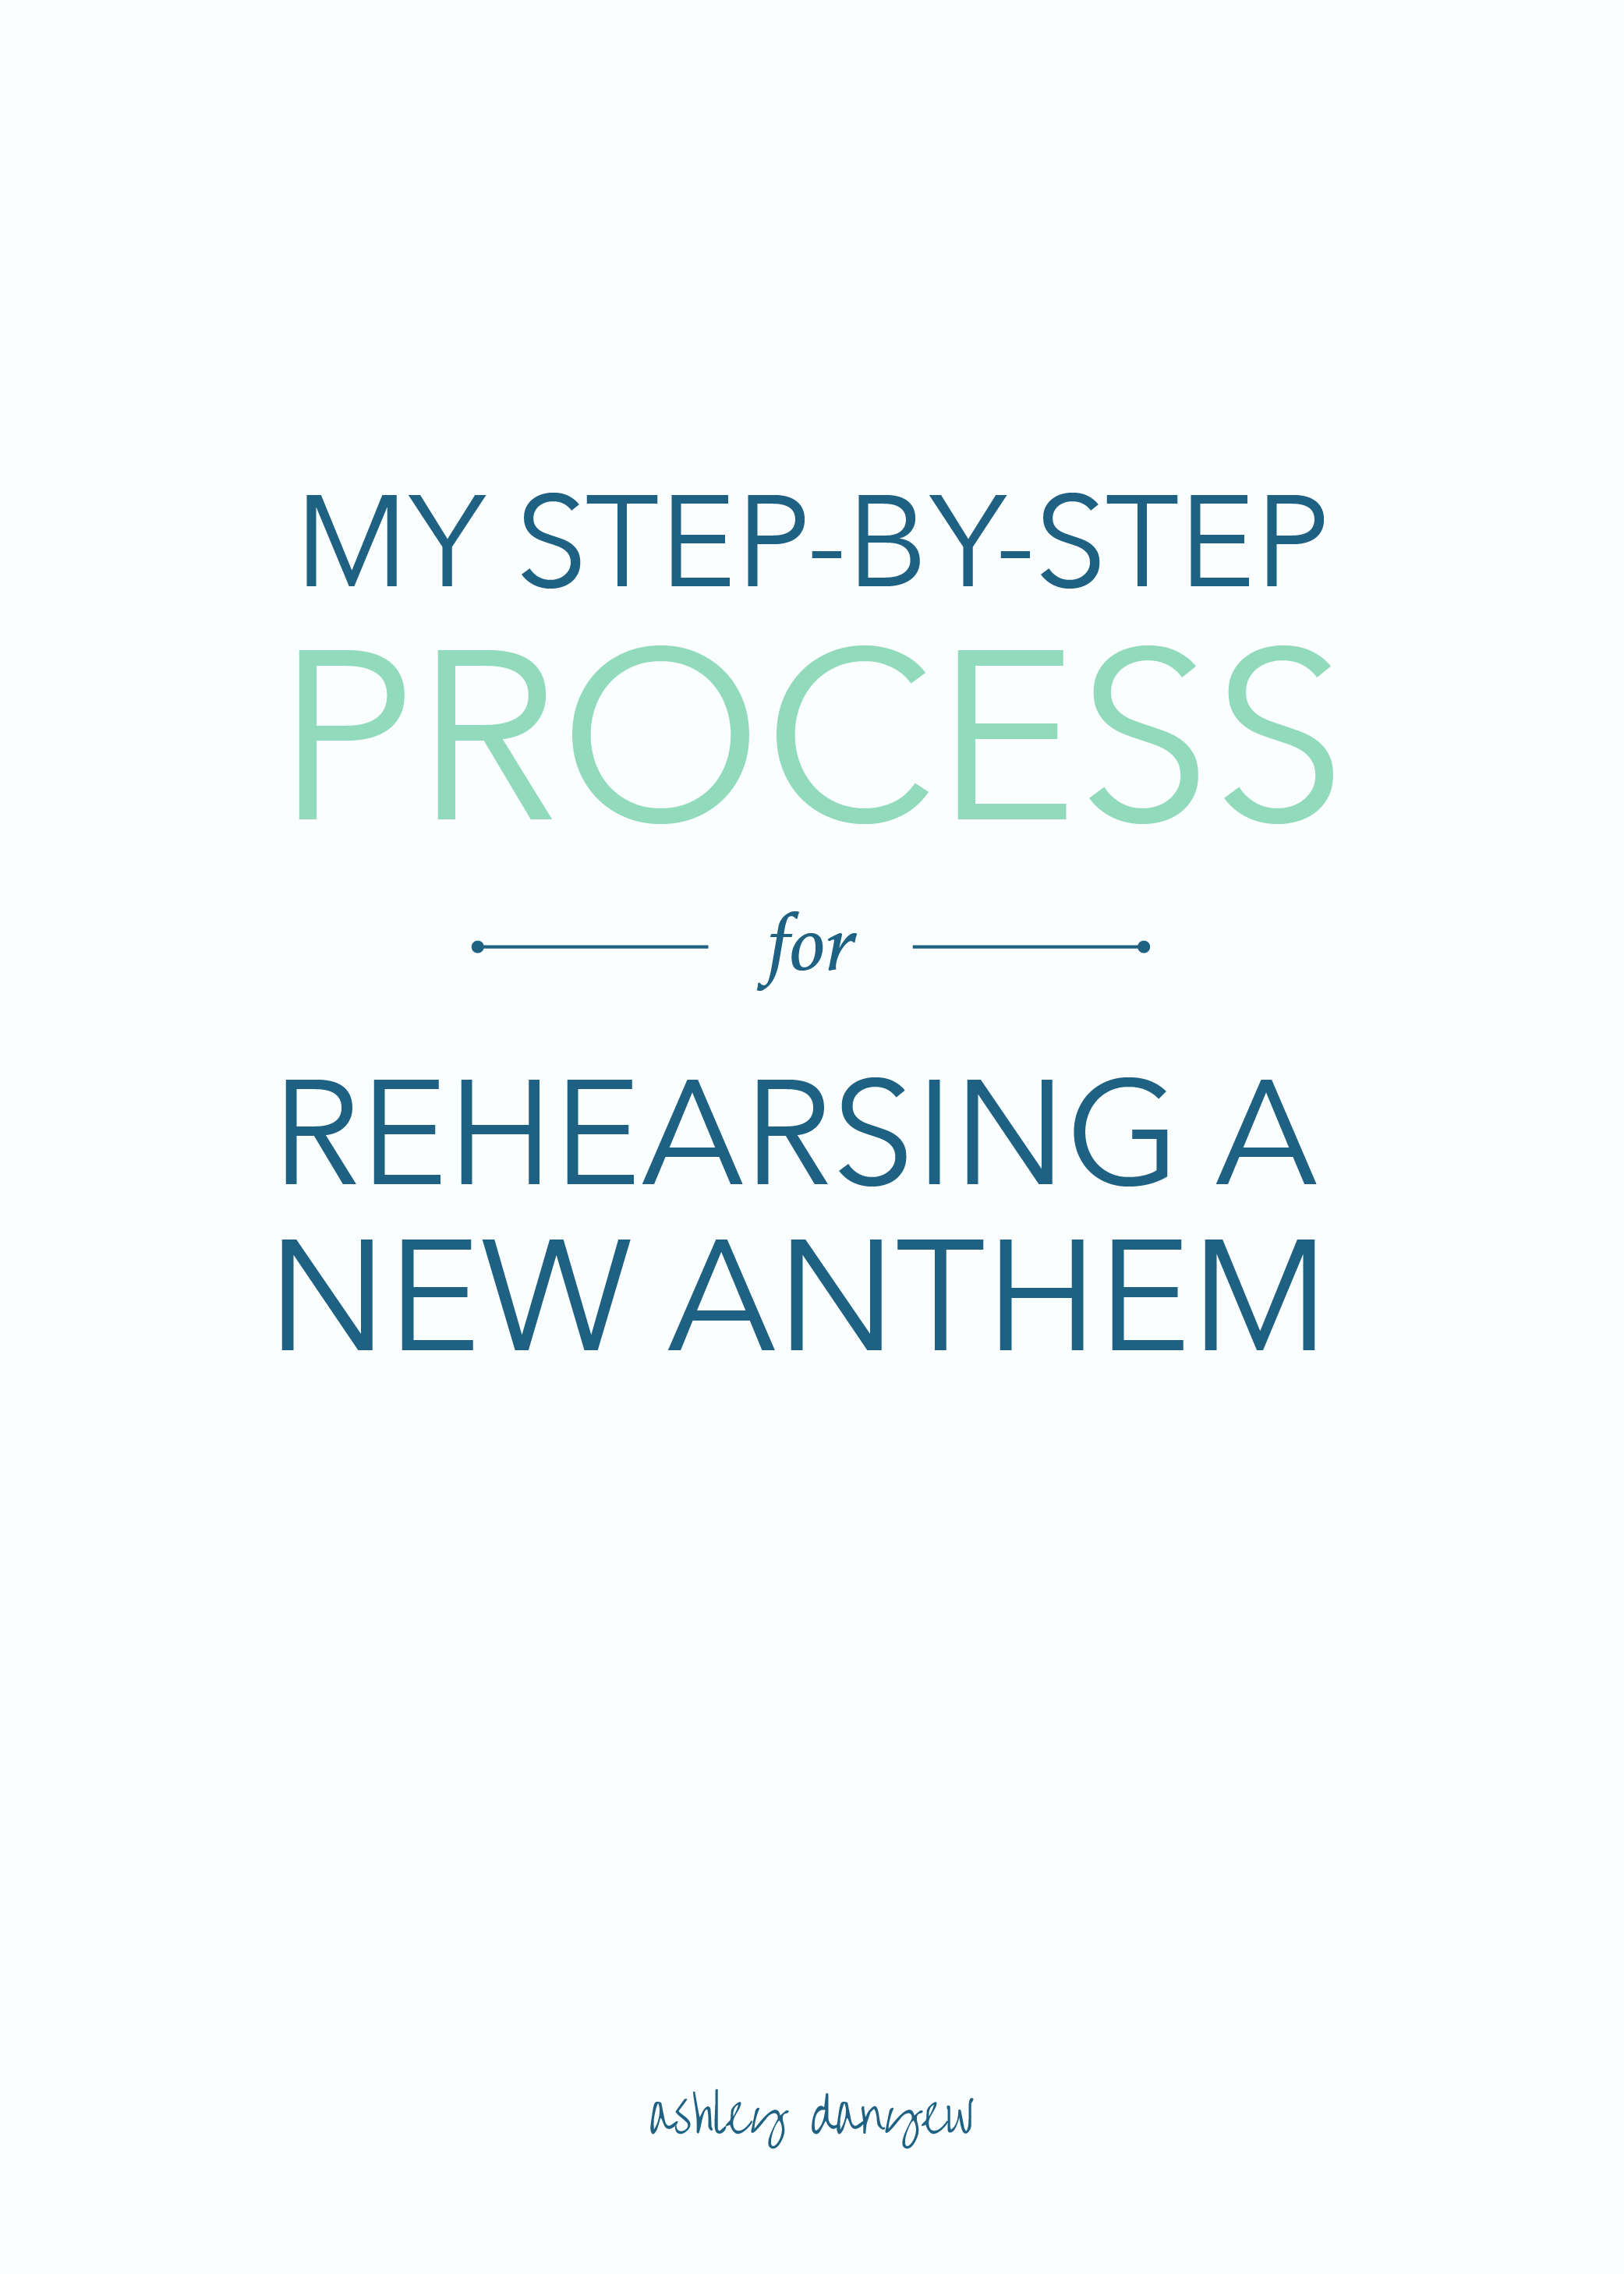 Copy of My Step-By-Step Process for Rehearsing a New Anthem